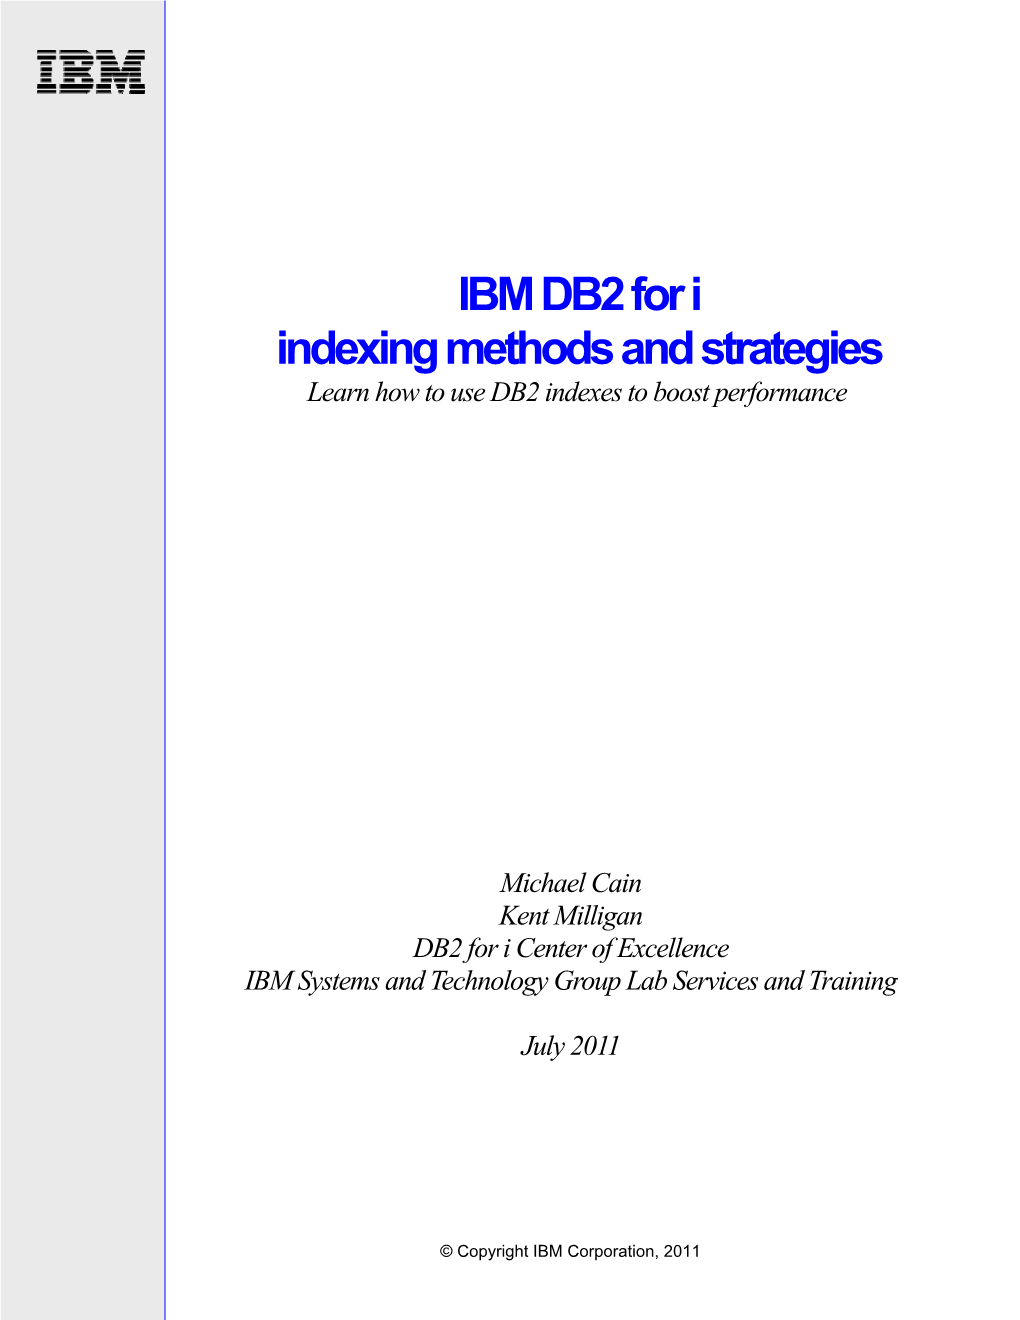 IBM DB2 for I Indexing Methods and Strategies Learn How to Use DB2 Indexes to Boost Performance